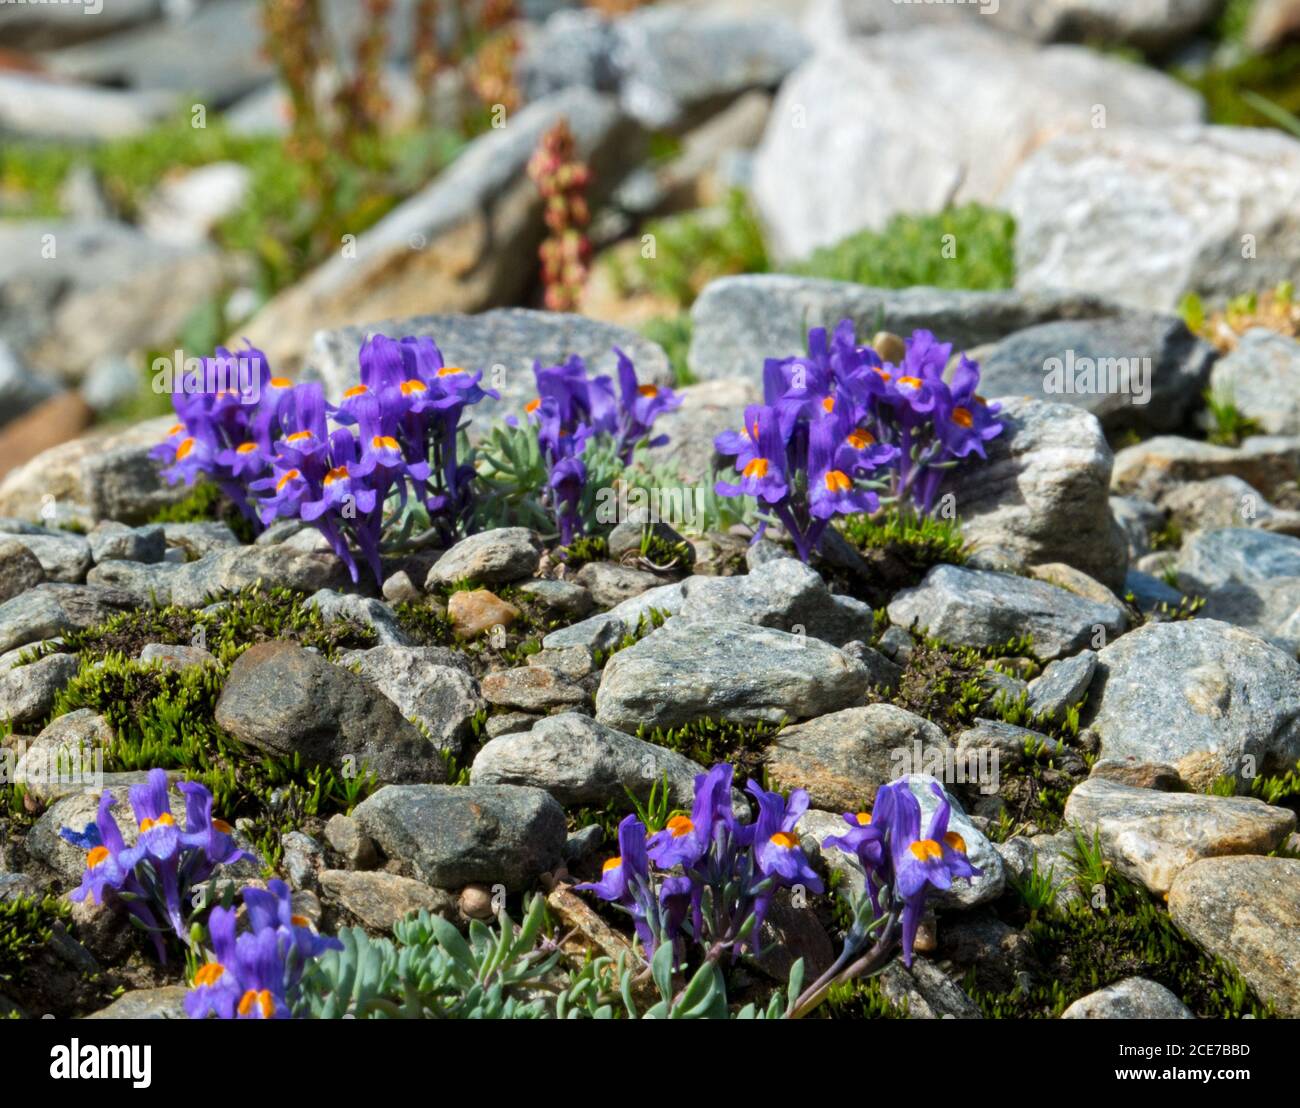 Alpine toadlax, Linaria alpina, purple flowers with orange lobes in the centre , growing in its natural, rocky envrionment Stock Photo